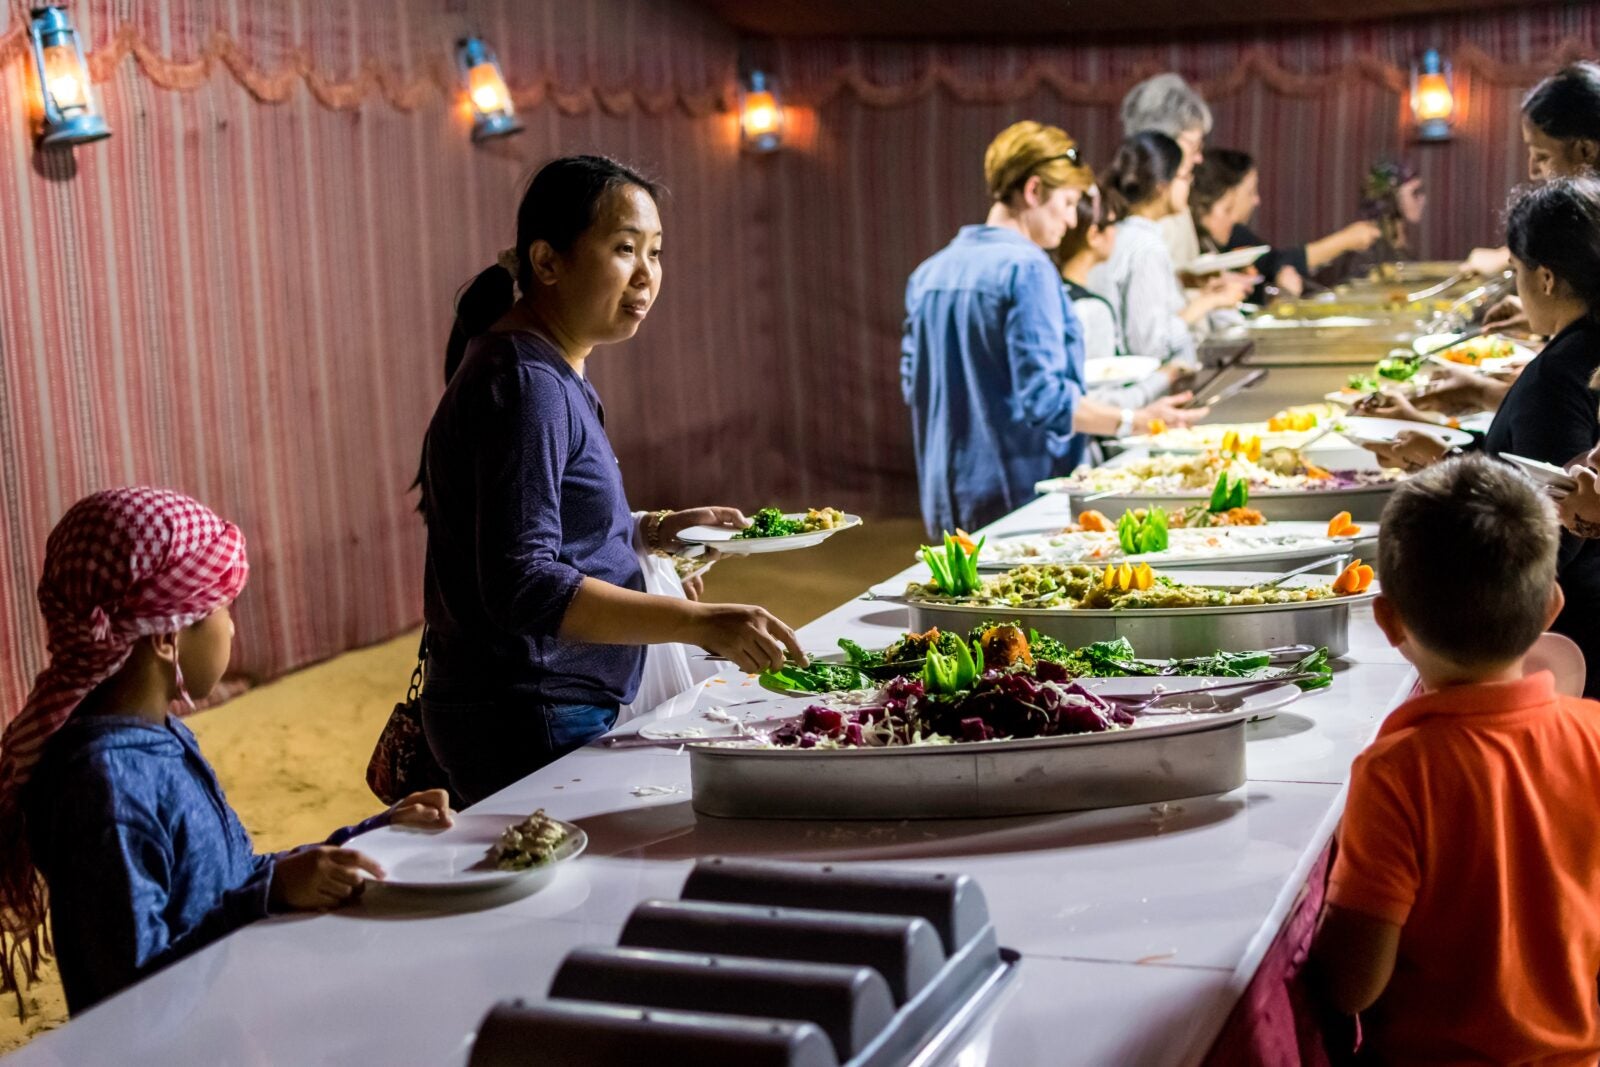 A Group of People Getting Food on Buffet Table